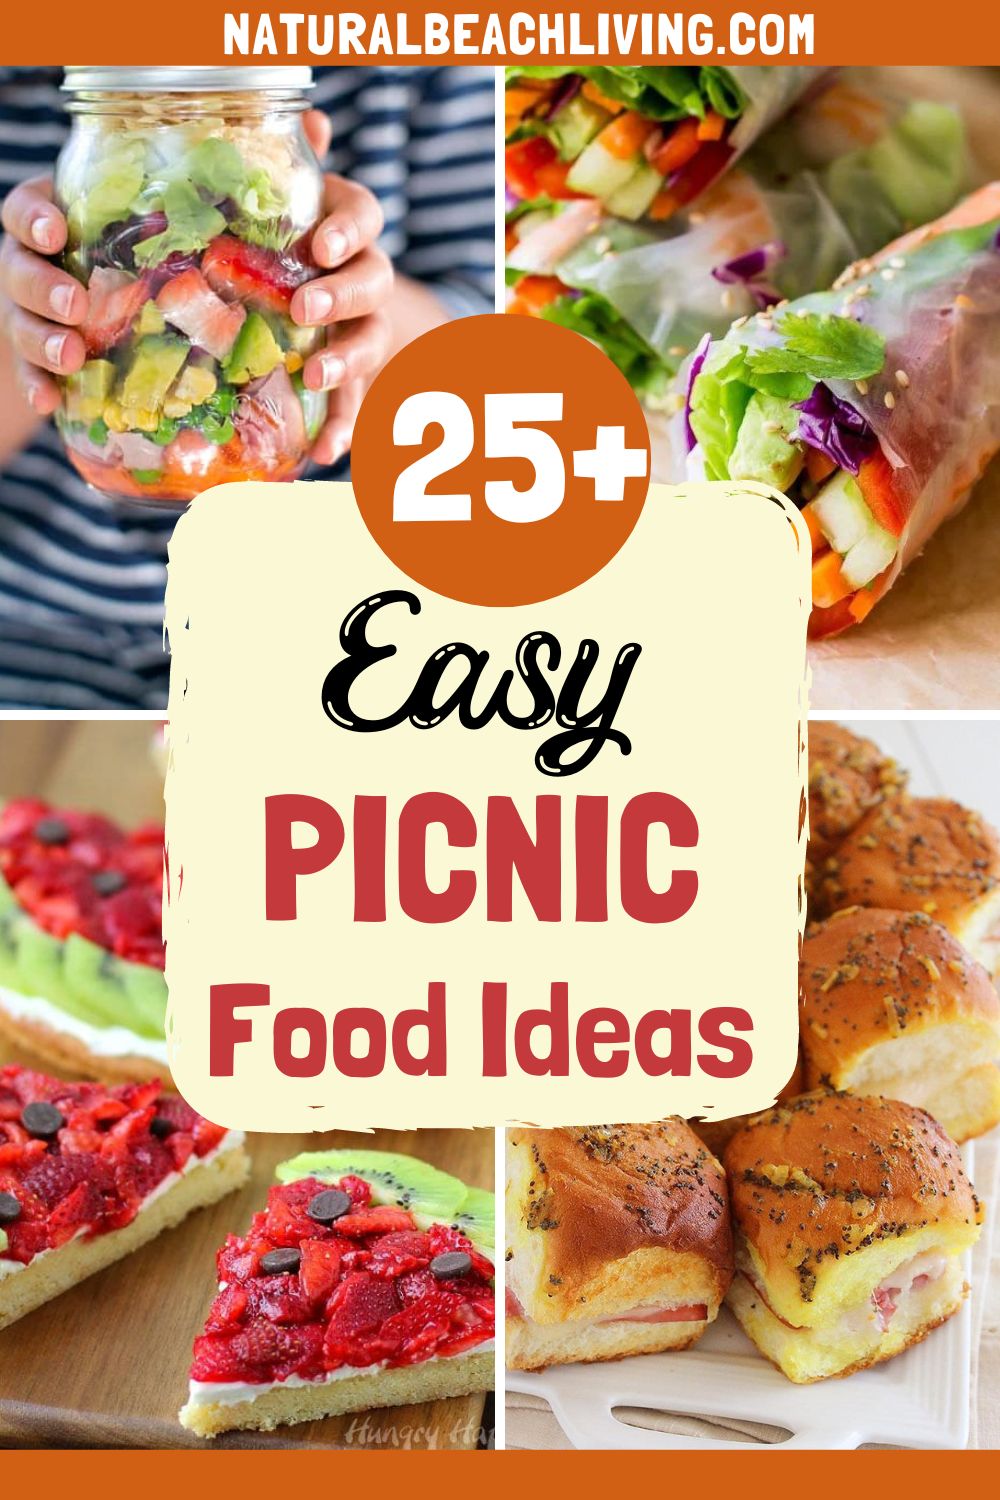 20+ Easy Picnic Food Ideas Everyone Will Love